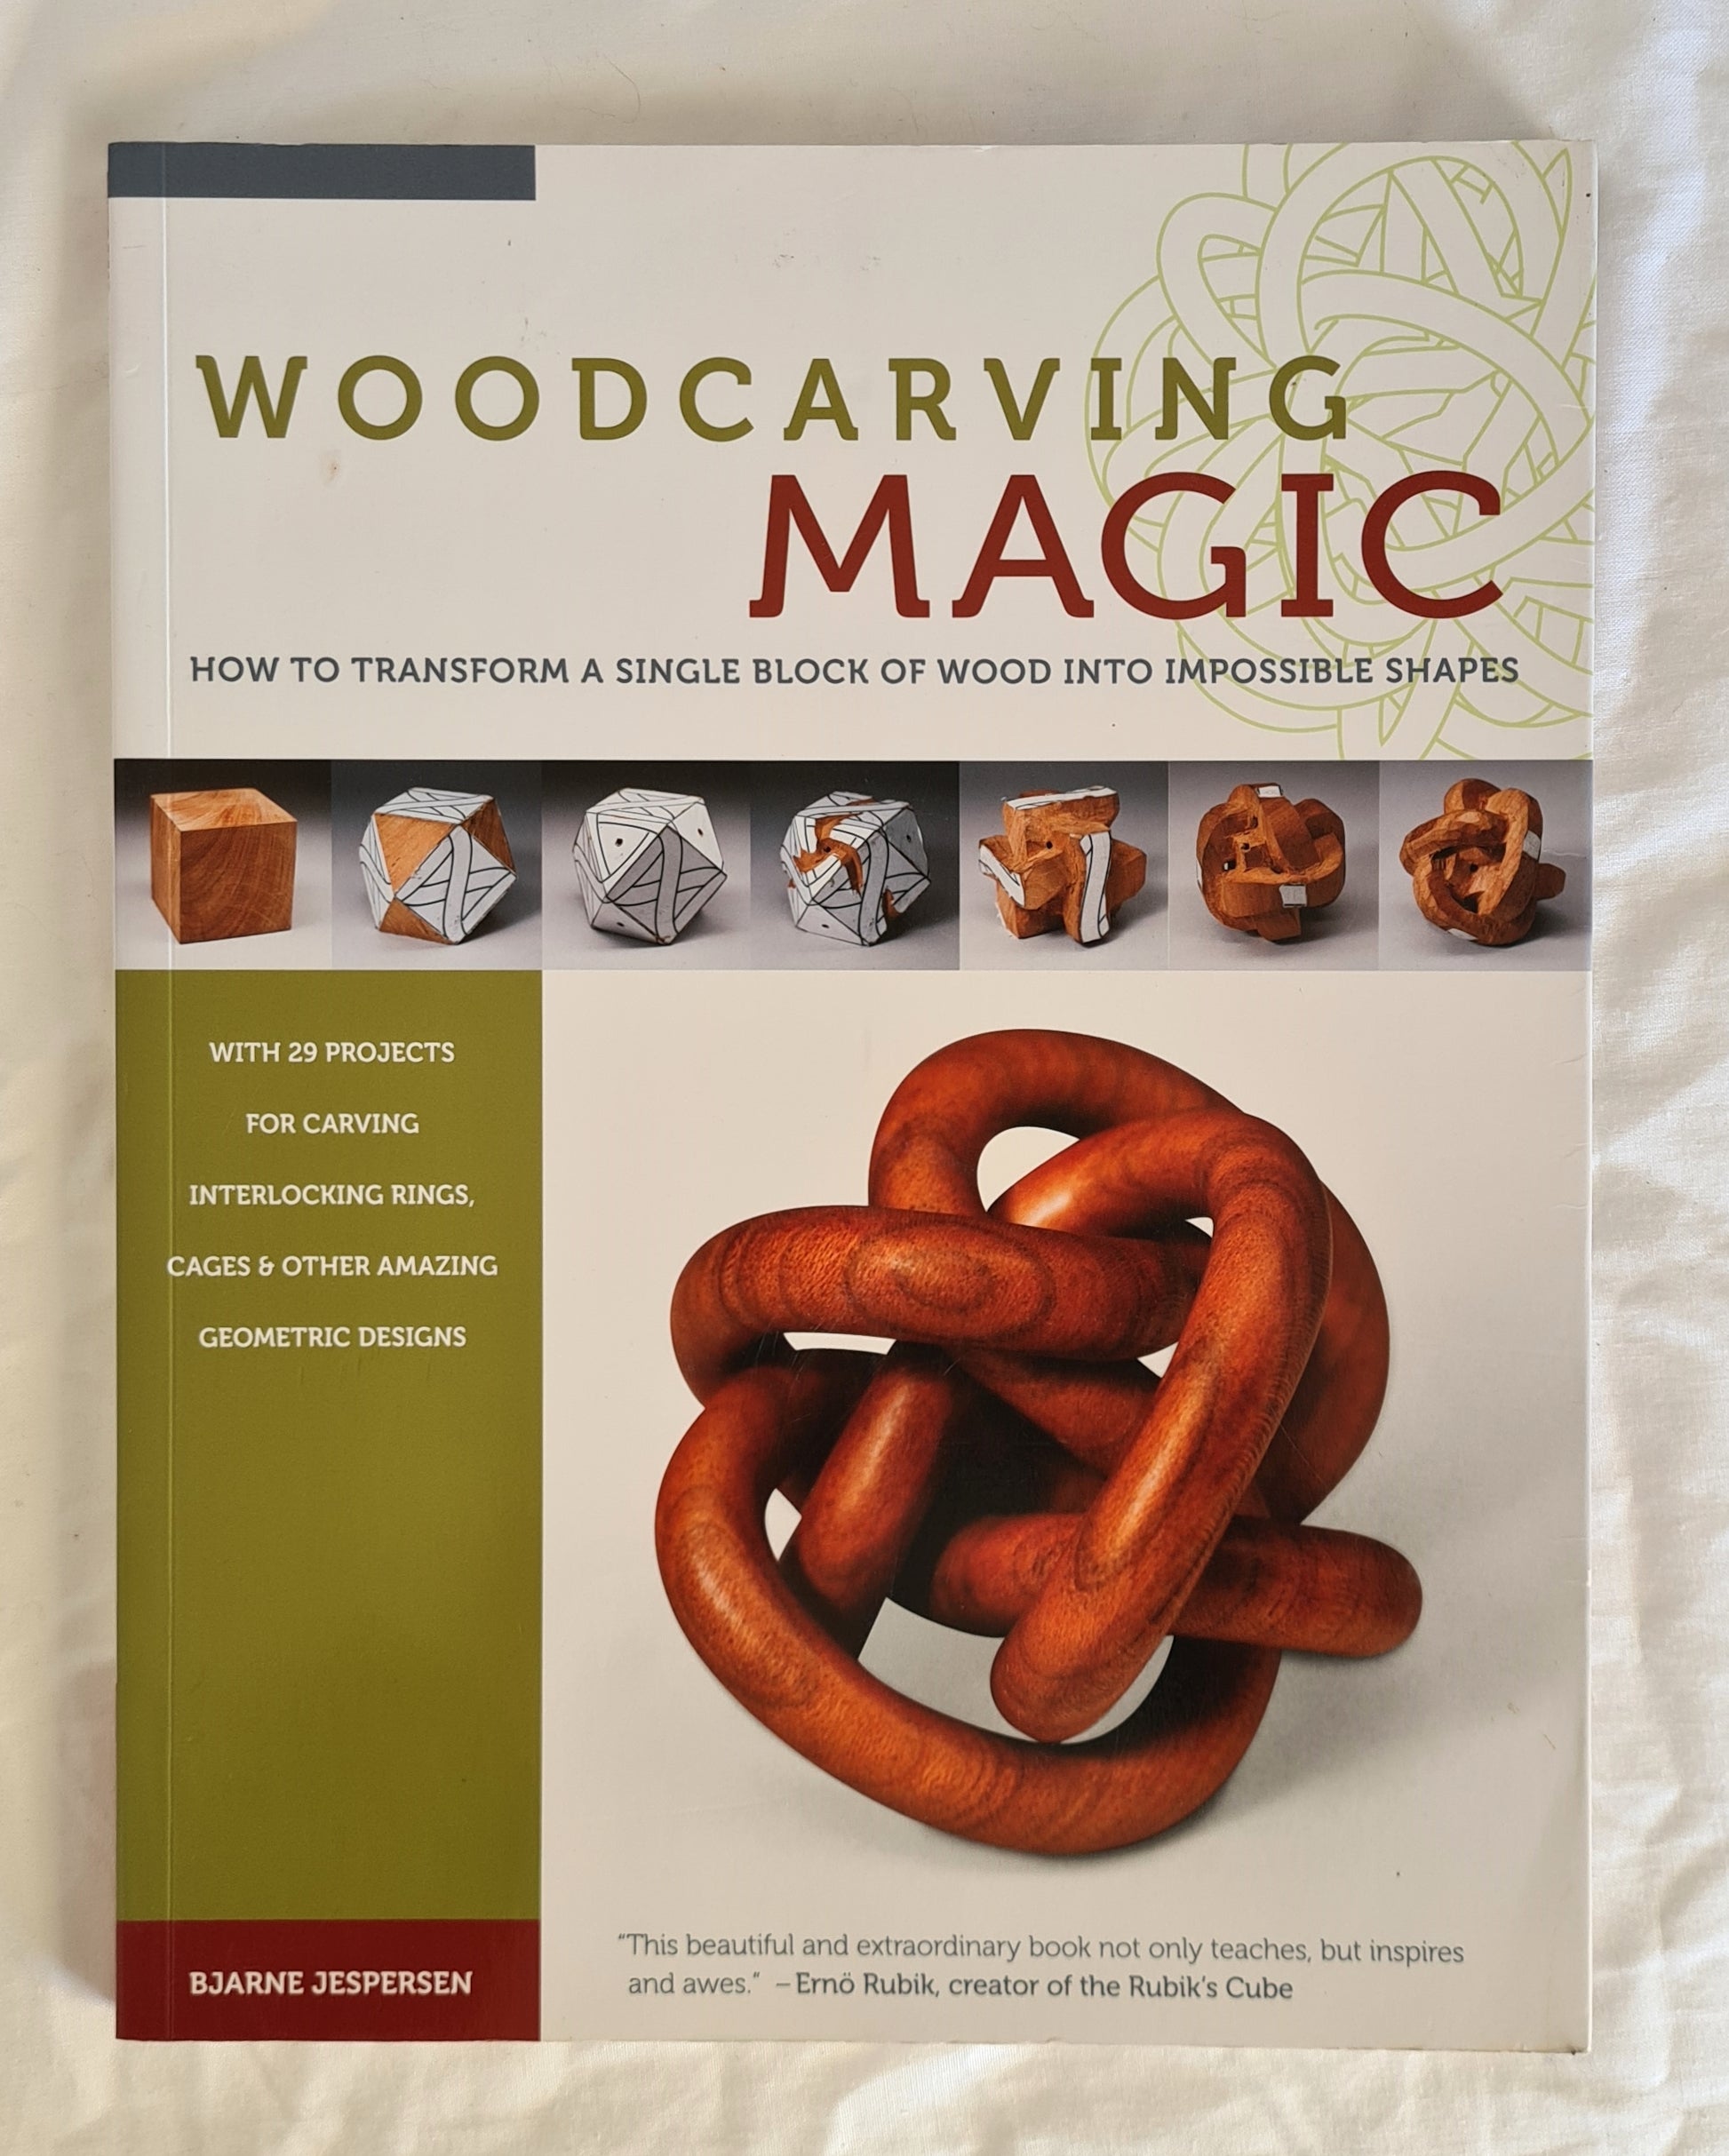 Woodcarving Magic  How to Transform a Single Block of Wood Into Impossible Shapes  by Bjarne Jespersen